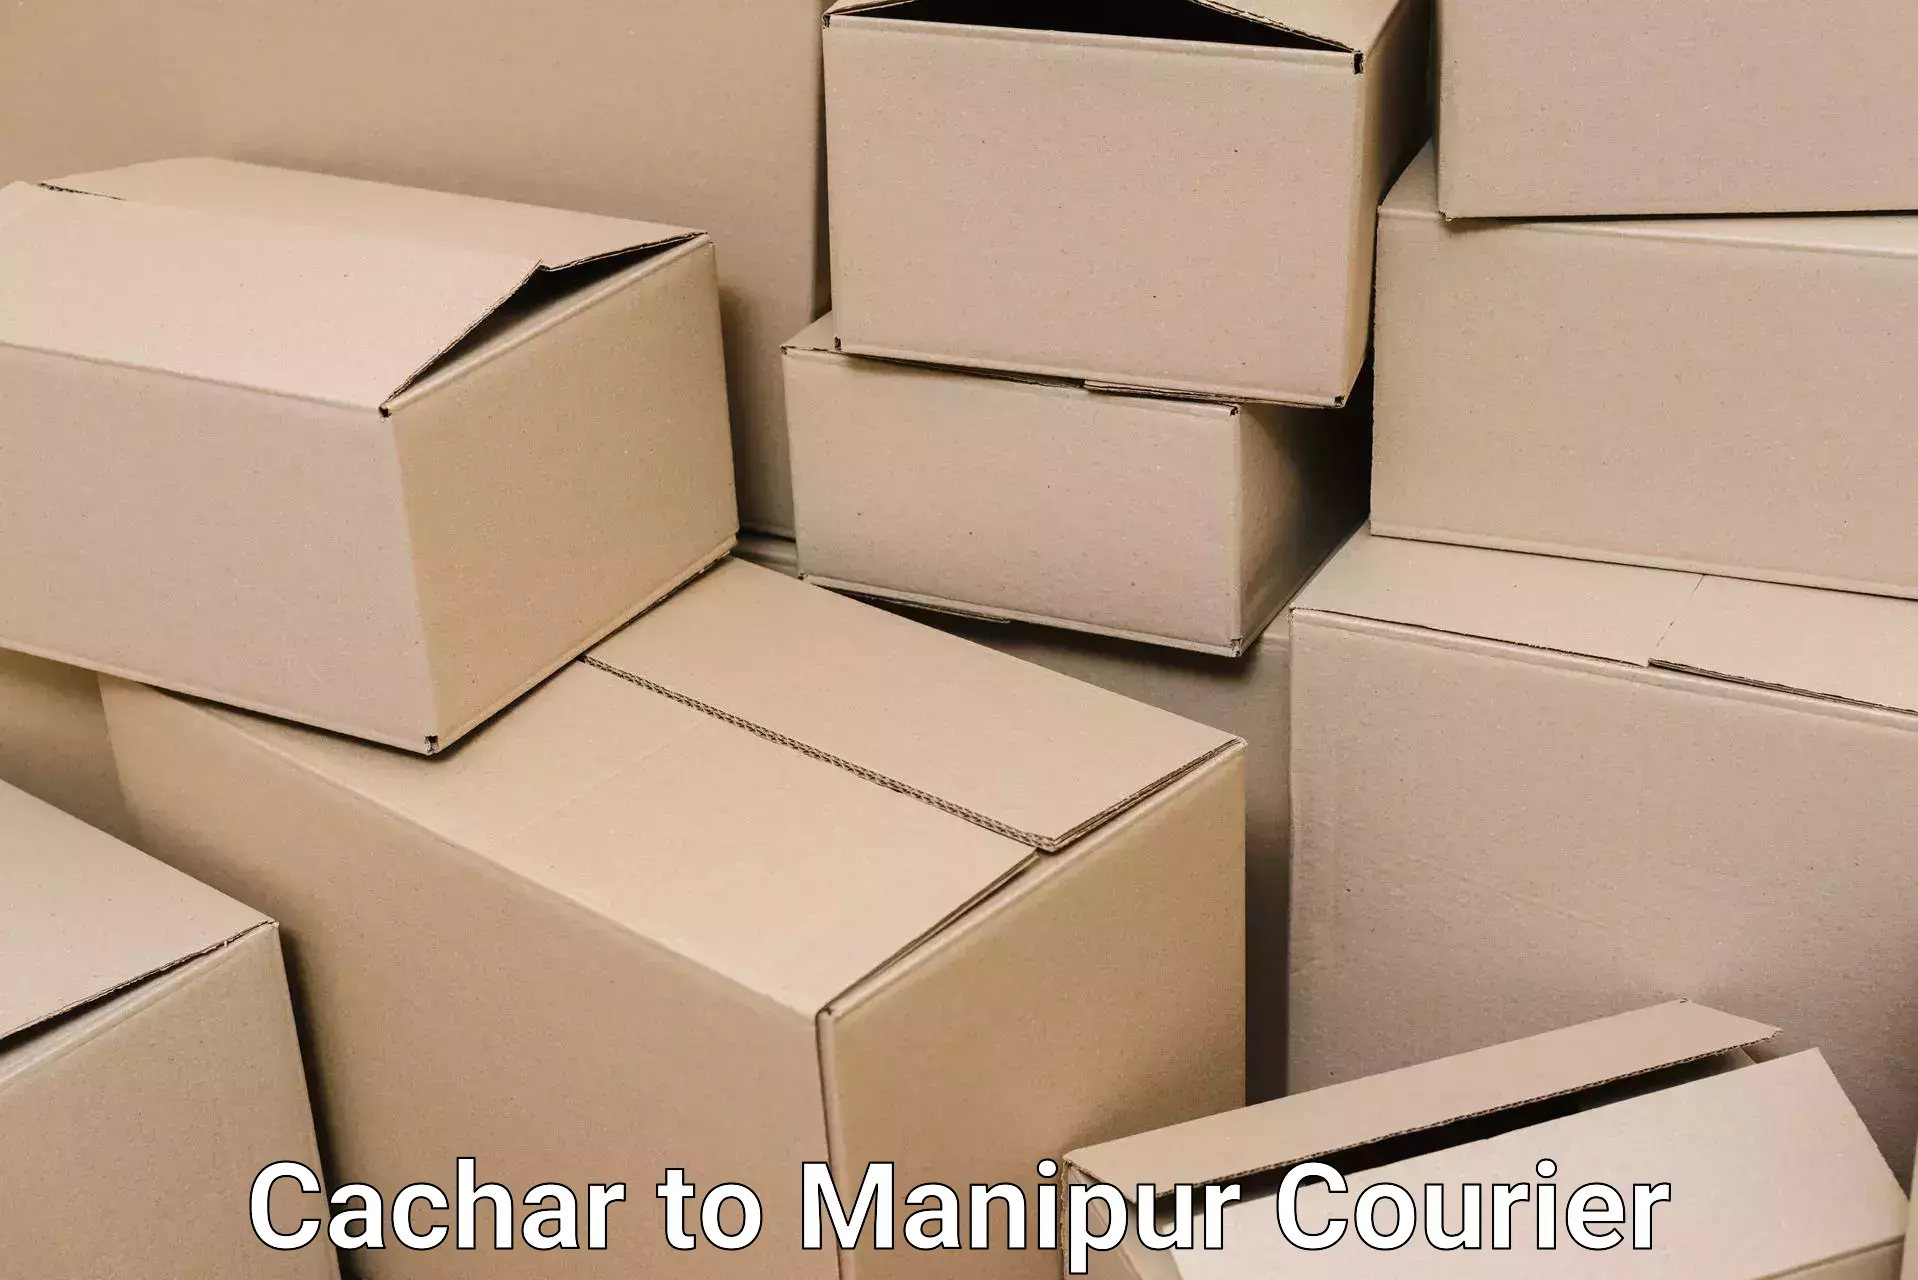 Trusted moving company Cachar to Manipur